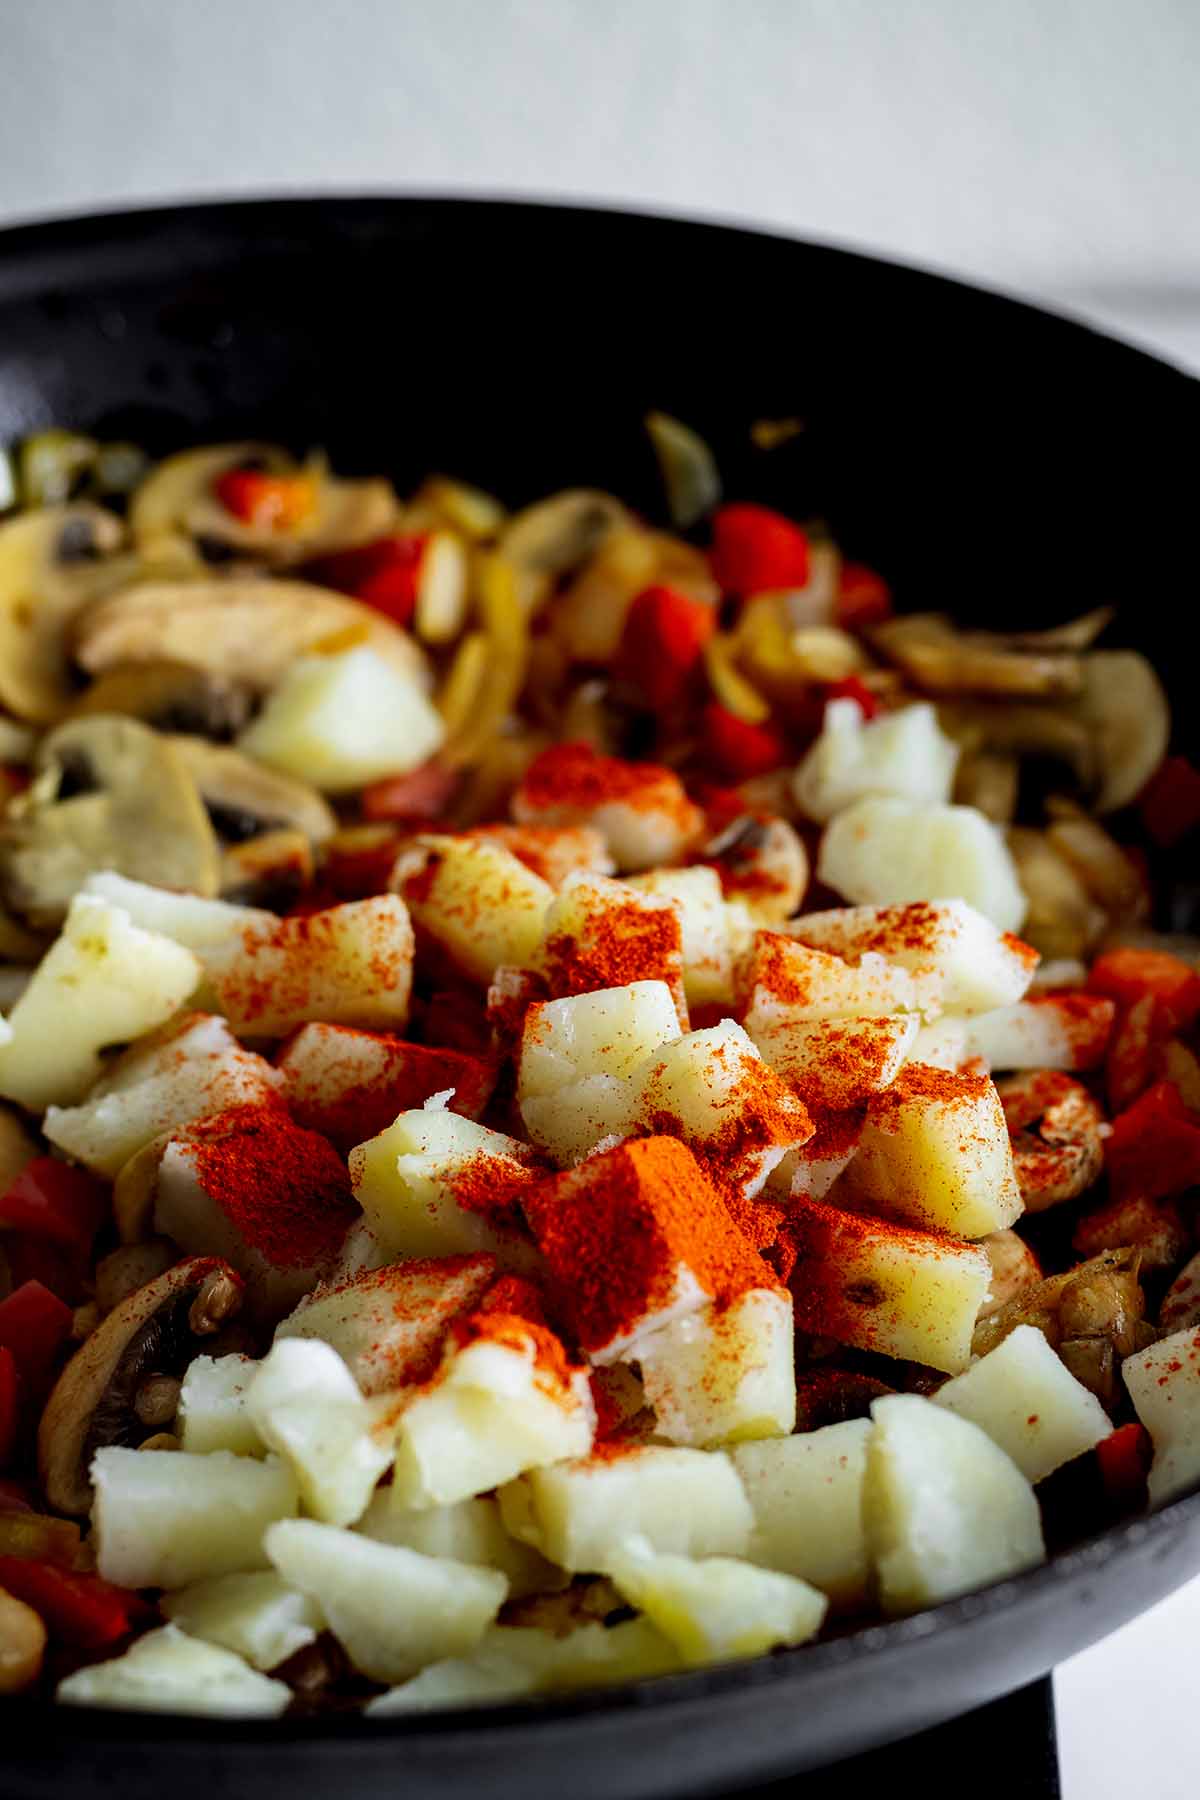 Paprika added to pan with potatoes, onions, mushrooms and red pepper.